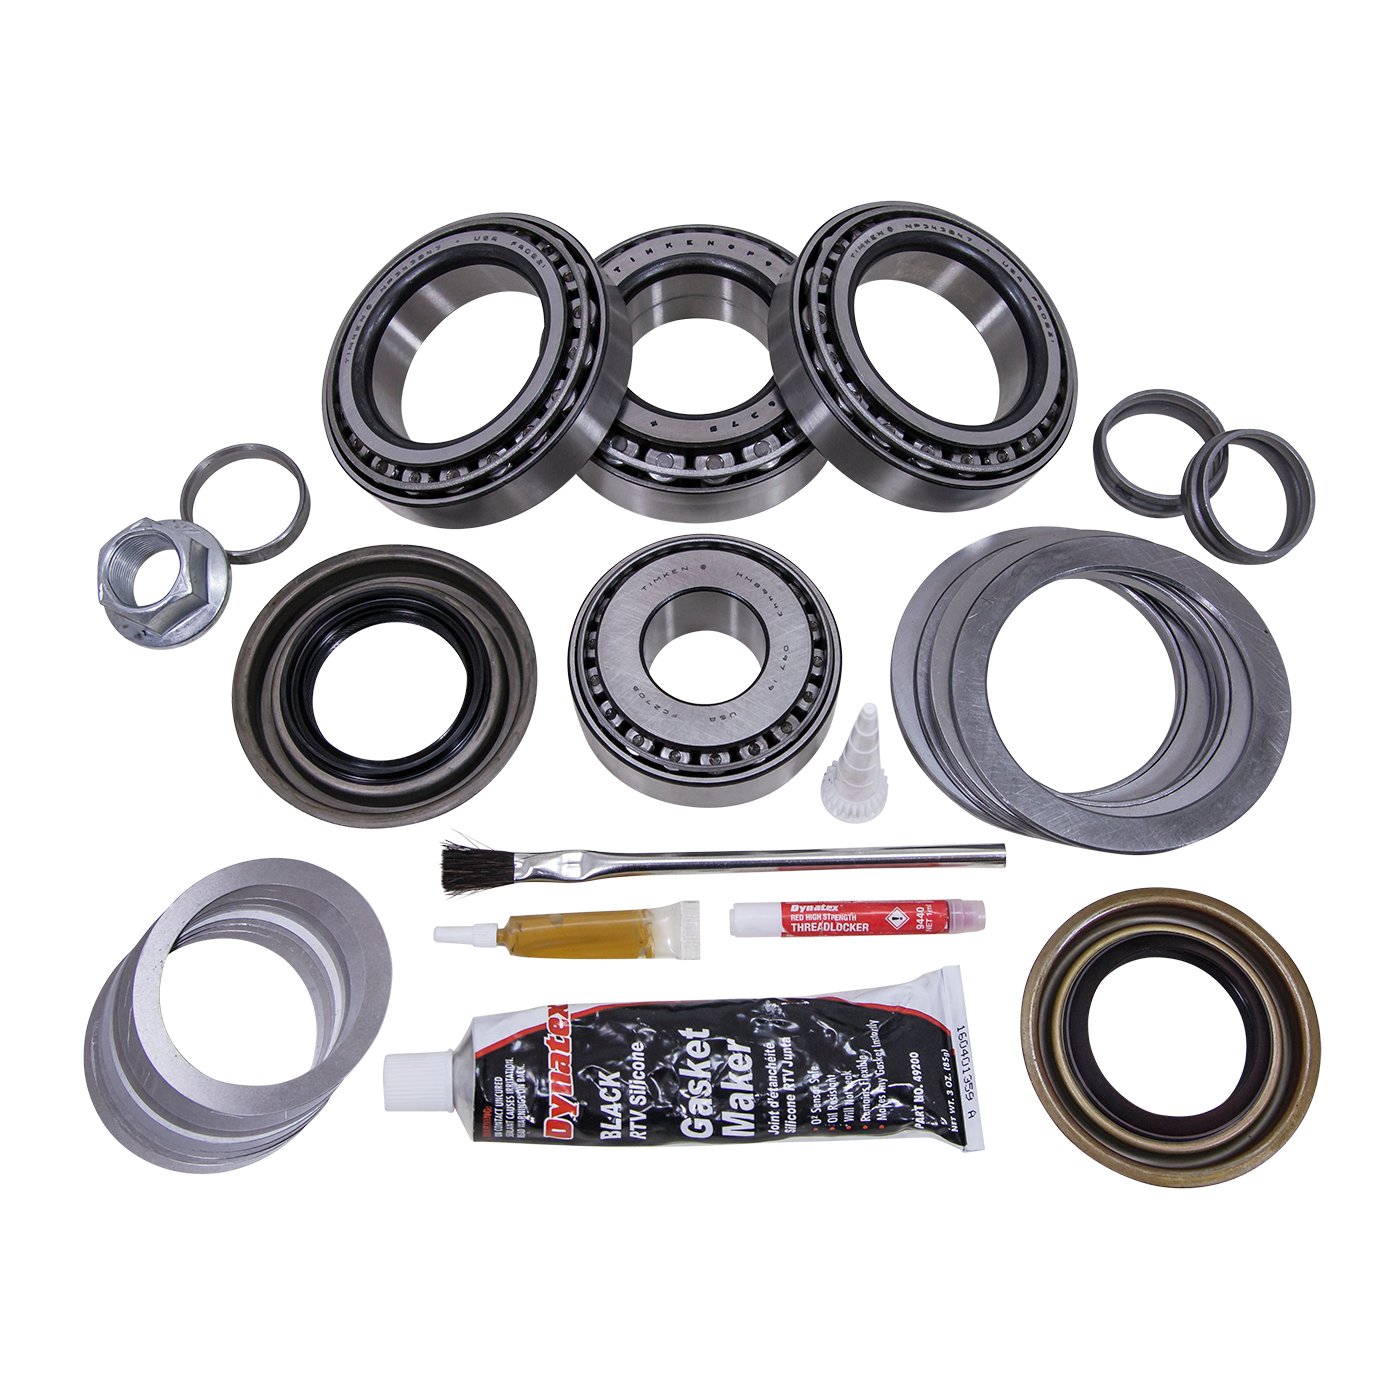 USA Standard ZK F9.75-A Master Overhaul Kit, For The '97-'98 Ford 9.75 in. Differential